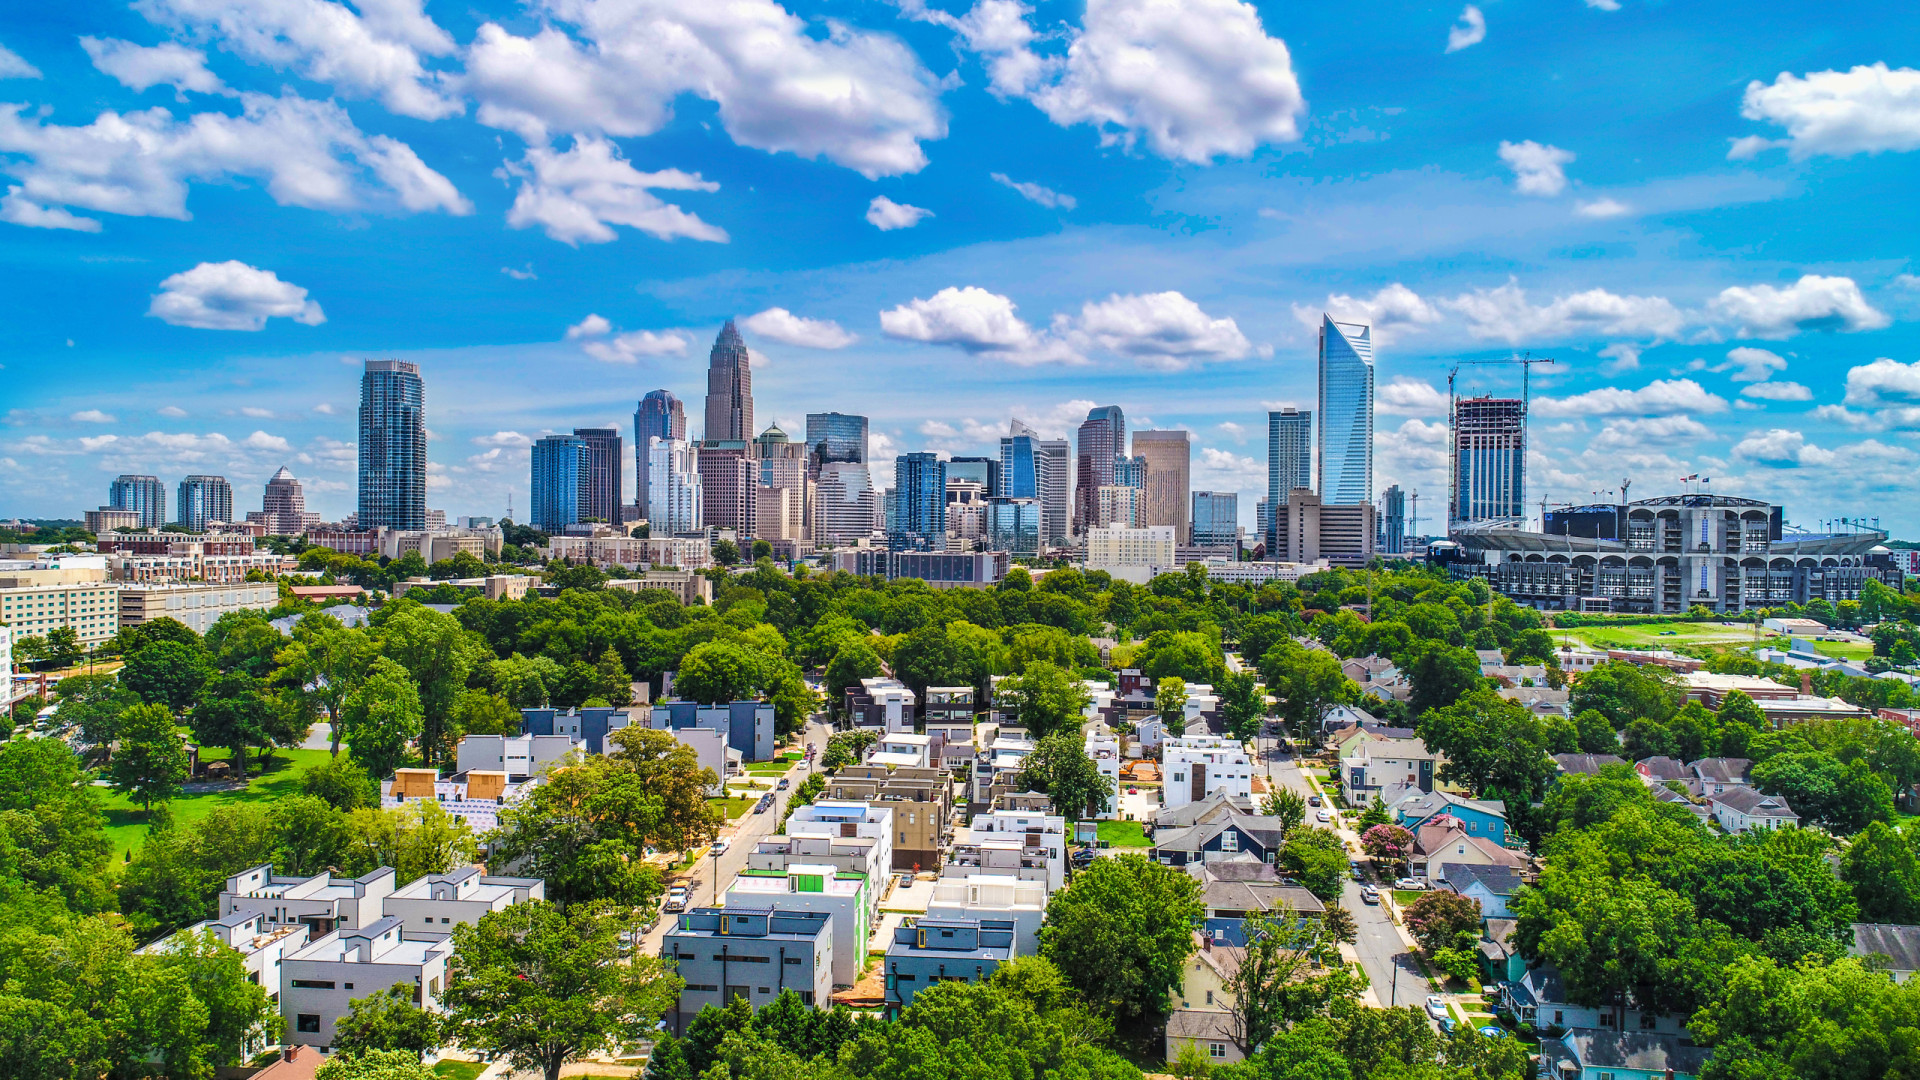 <p>With a rent index of 59.7, Charlotte is North Carolina's commercial giant. Known for its influential banking sector, it's a city where business thrives against a backdrop of Southern charm.</p><p>You may also like:<a href="https://www.starsinsider.com/n/203982?utm_source=msn.com&utm_medium=display&utm_campaign=referral_description&utm_content=651794en-in"> Celebrity kids who became more famous than their parents</a></p>